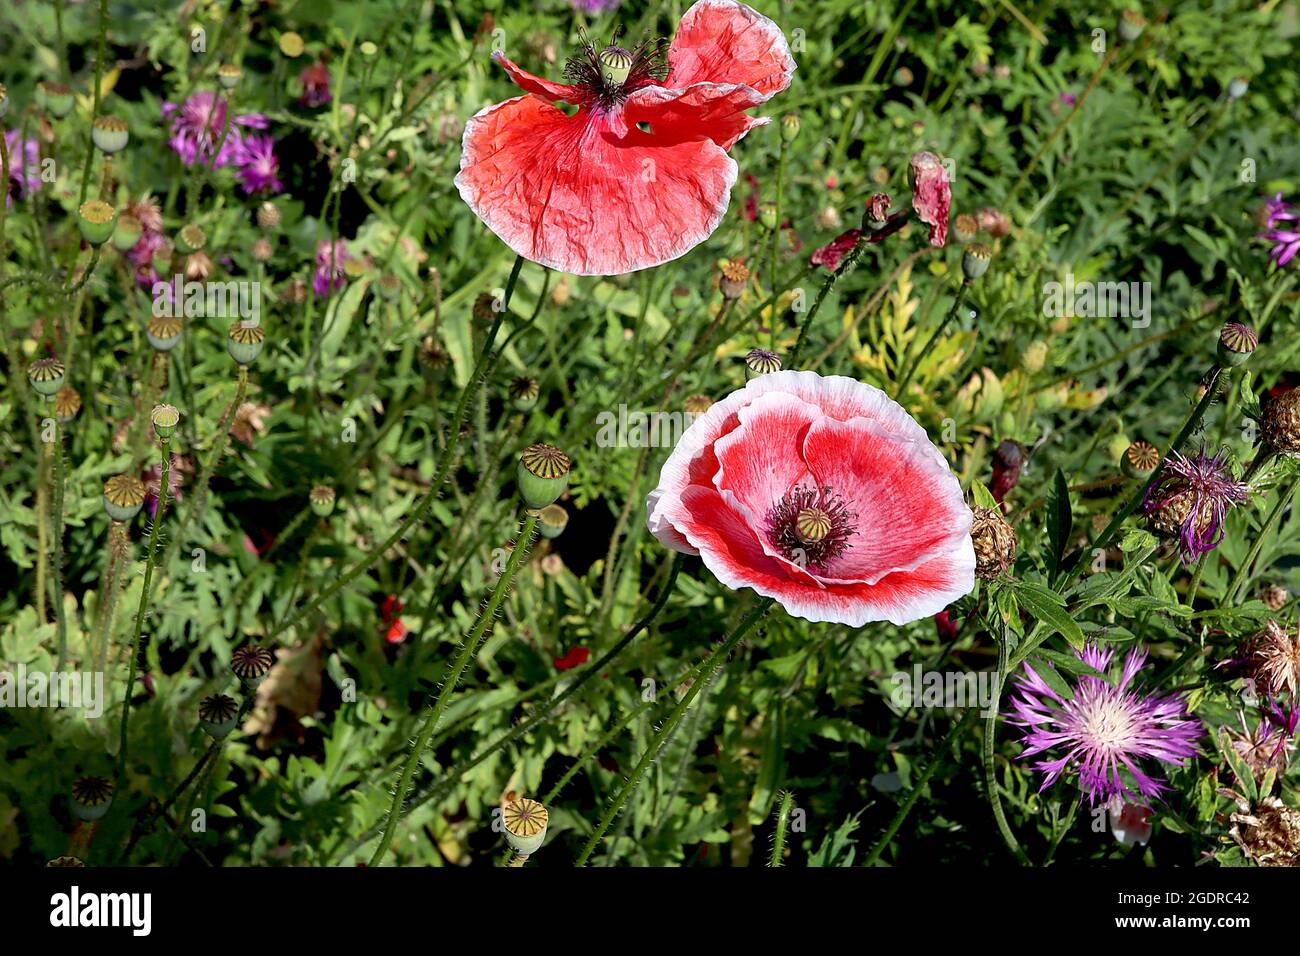 Papaver rhoeas Shirley Double Mixed corn poppy ‘Shirley Double Mixed’ – red flowers with white margins and centre, creased petals,  July, England, UK Stock Photo